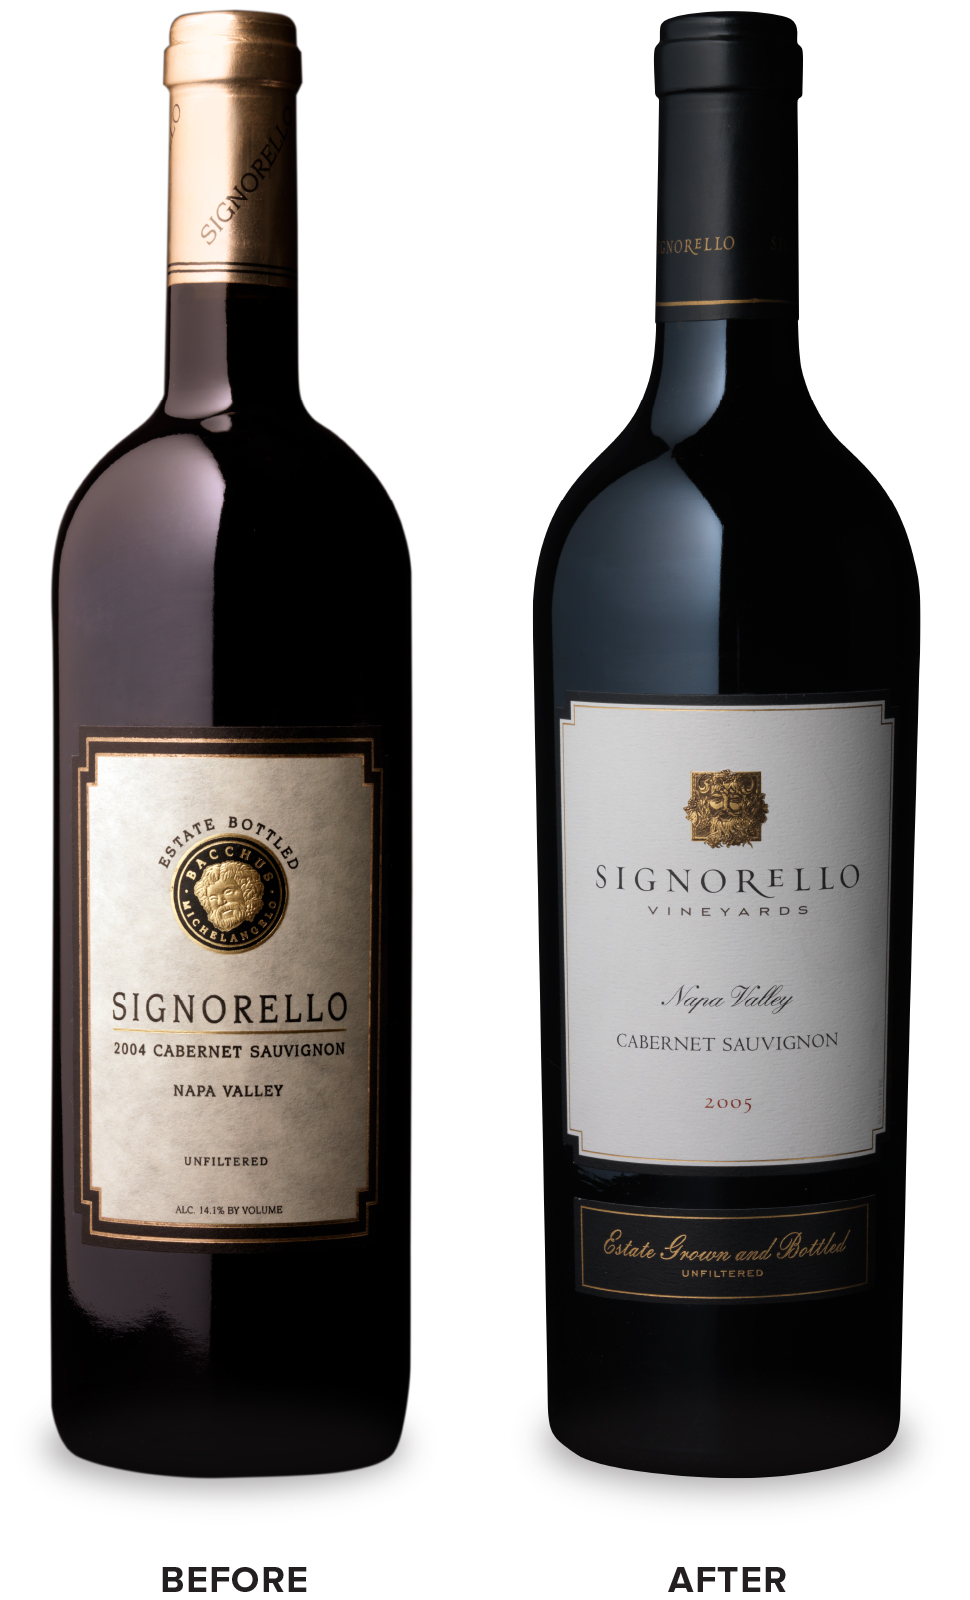 Signorello Vineyards Wine Packaging Before Redesign on Left & After on Right